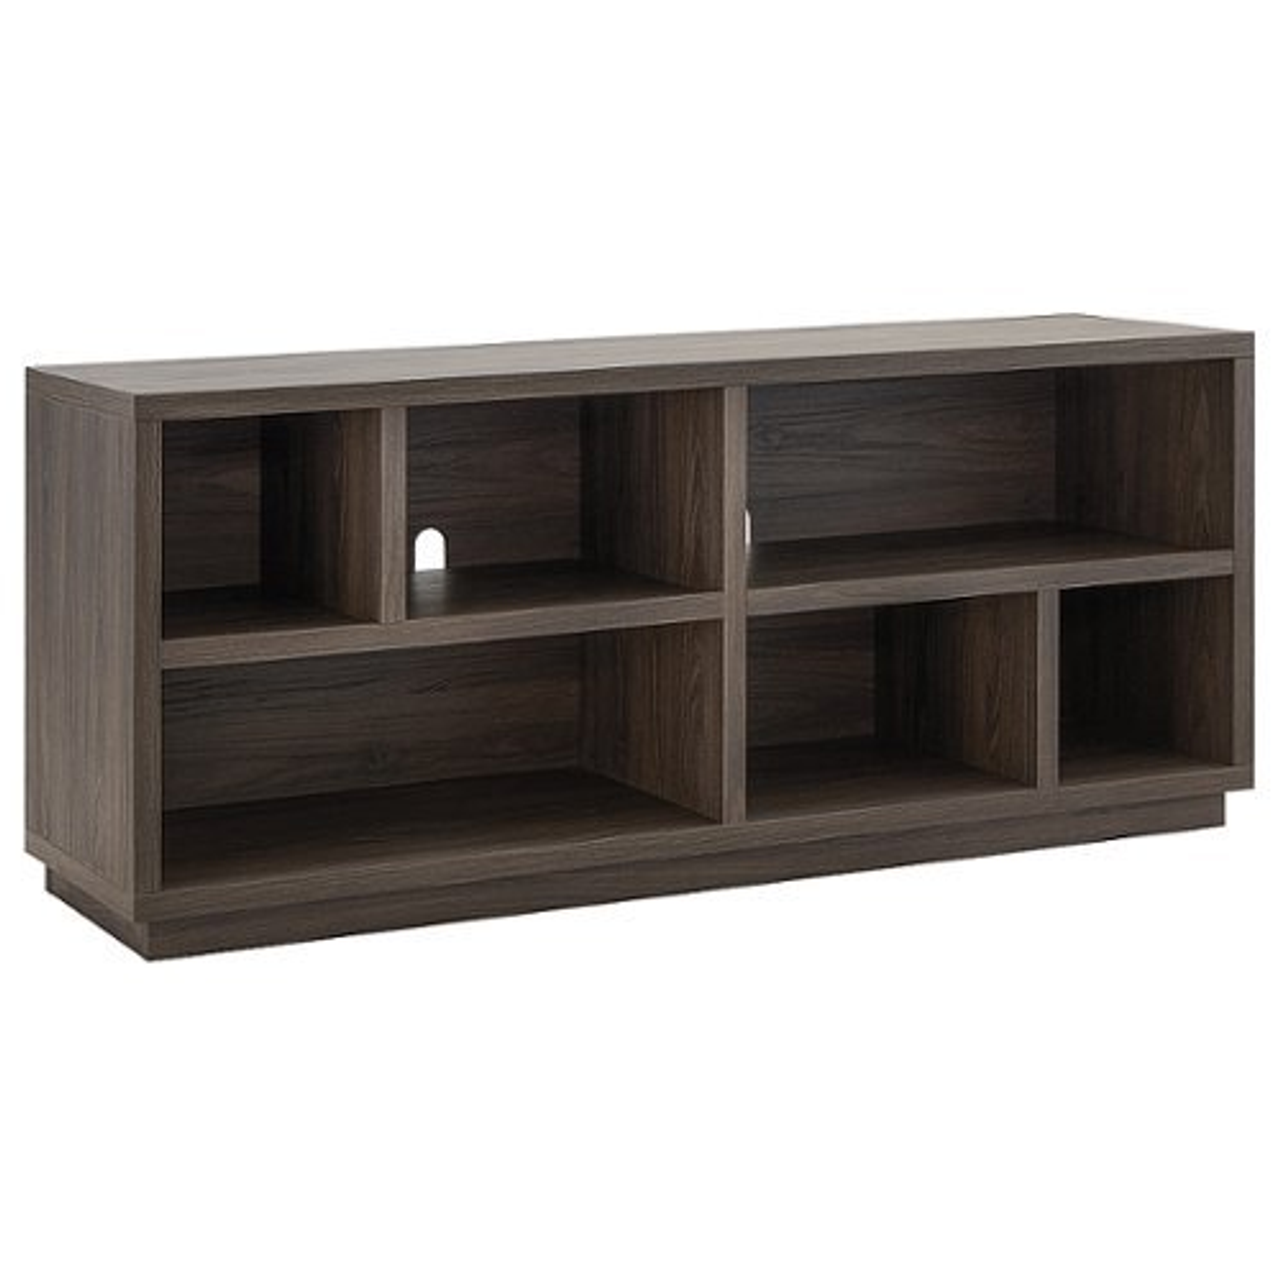 Camden&Wells - Bowman TV Stand for TVs up to 65" - Alder Brown